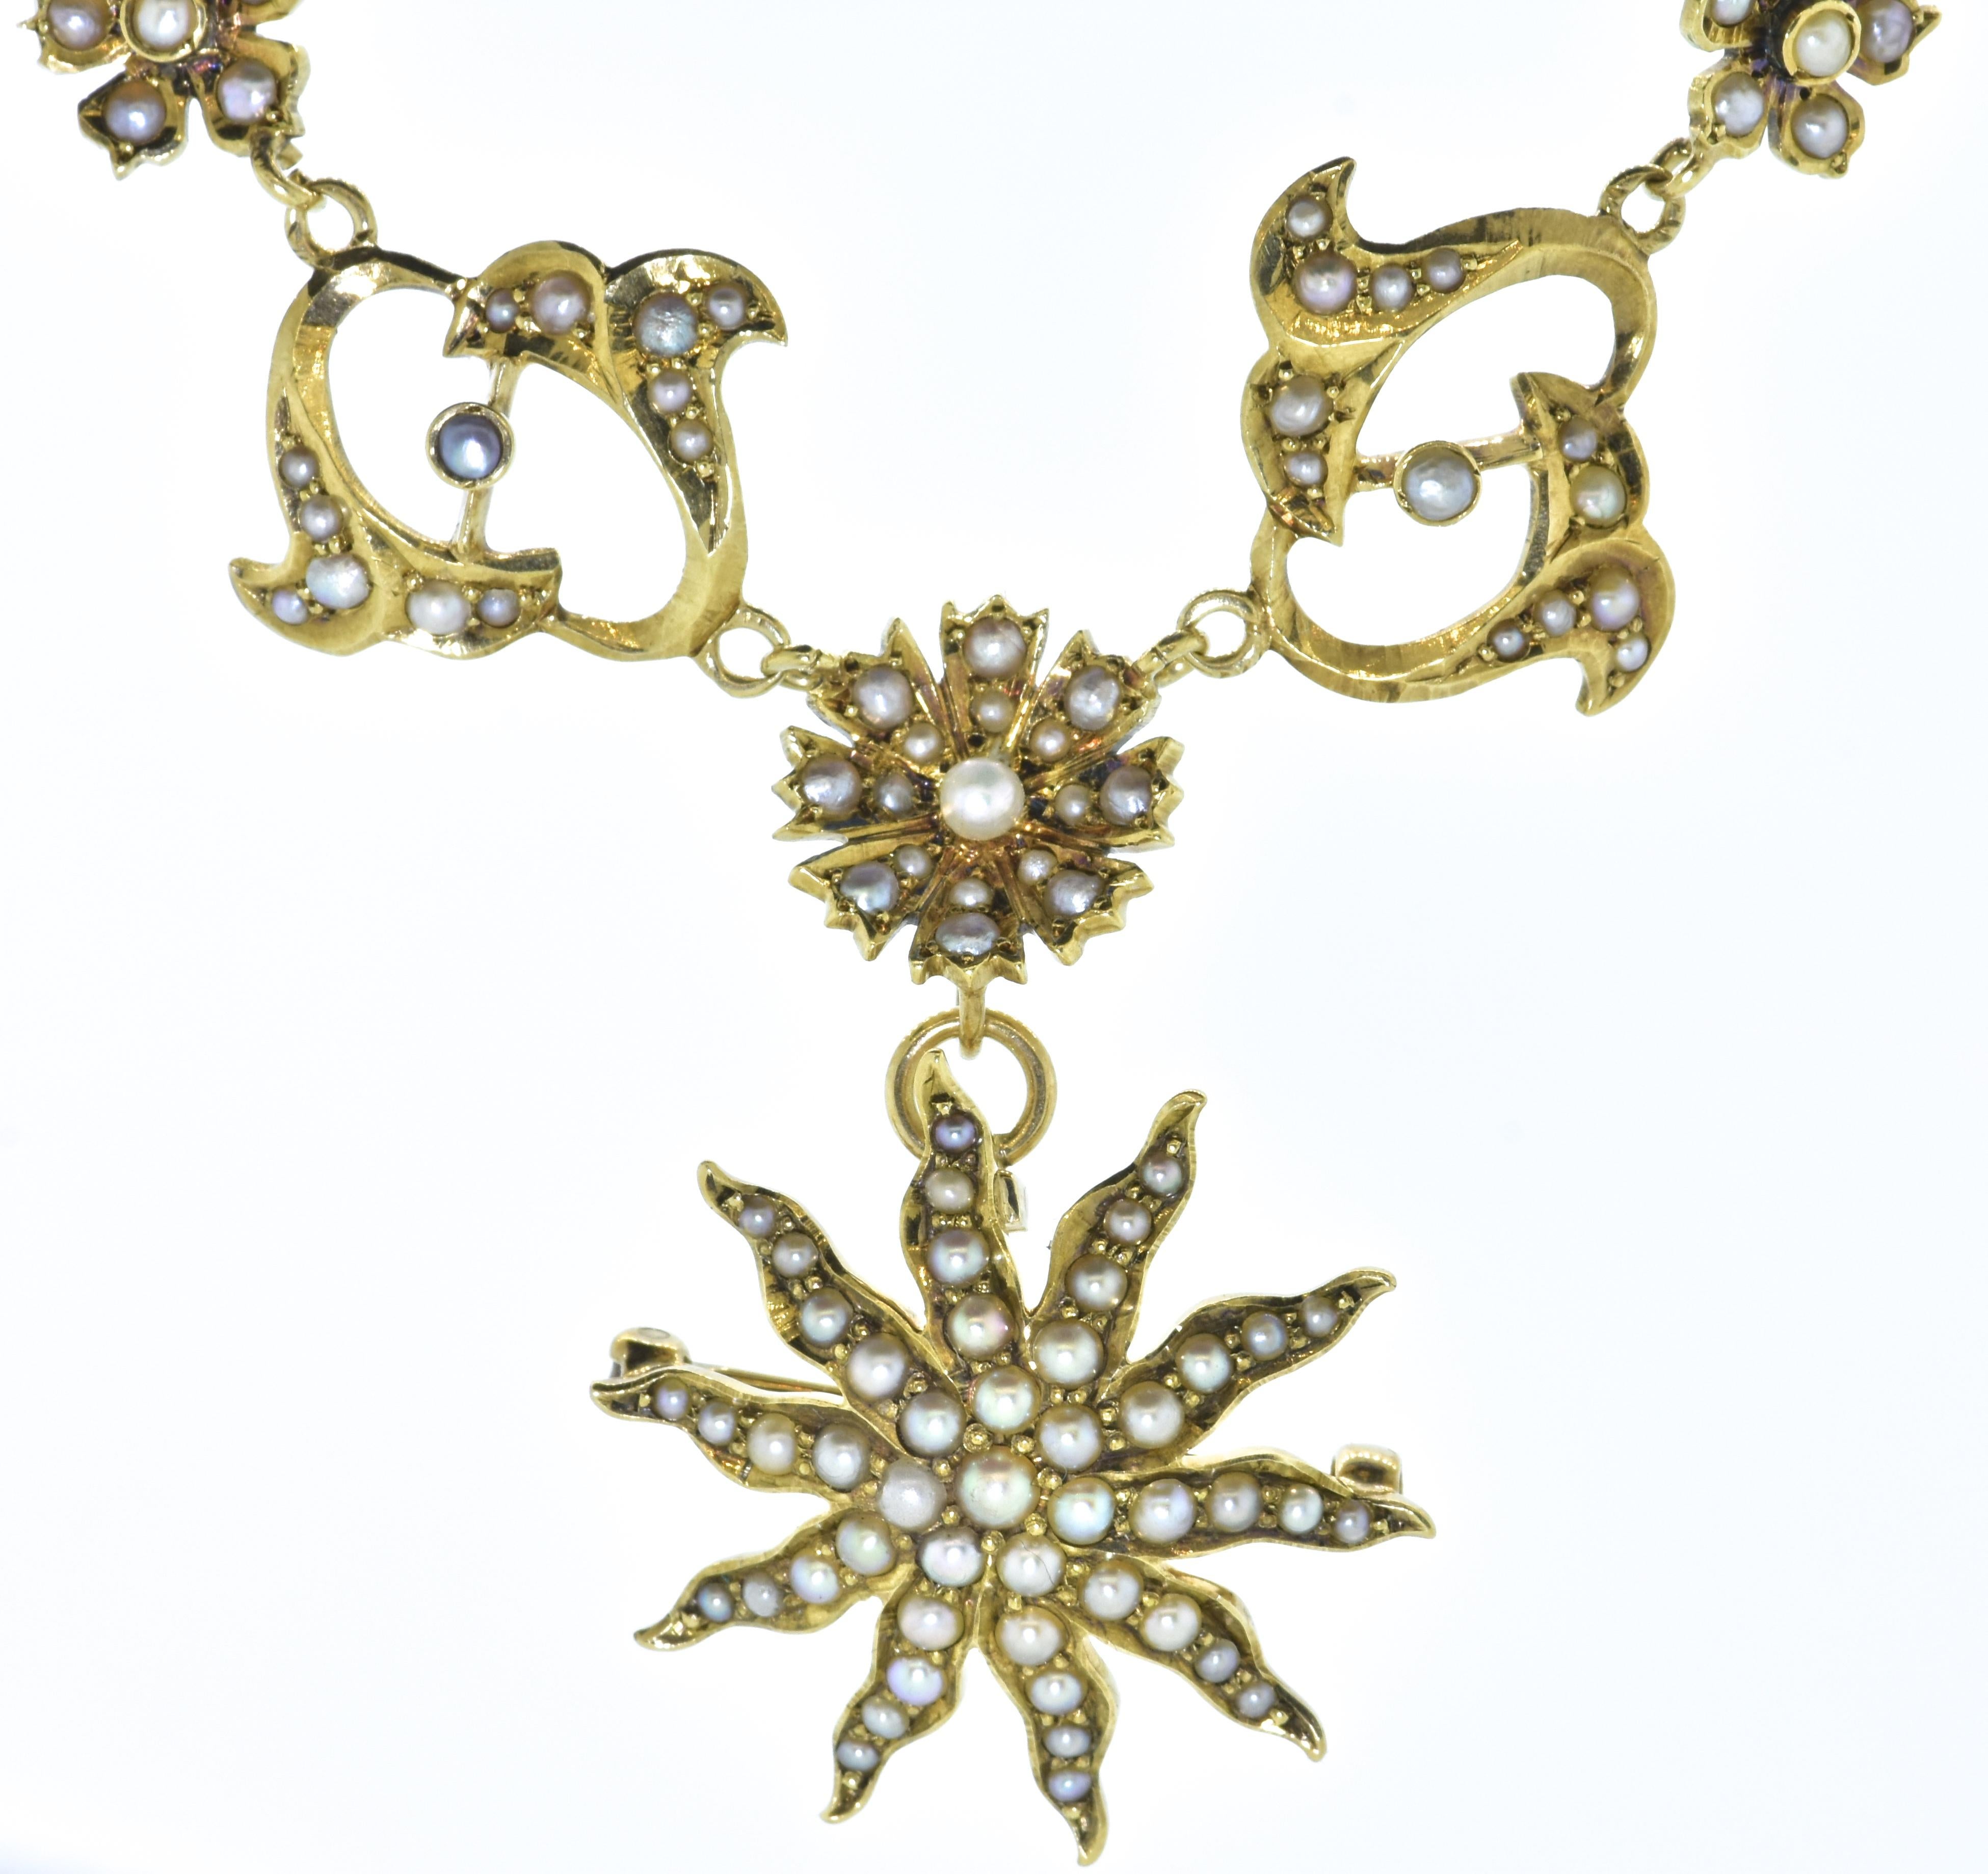 Antique necklace/brooch set throughout with natural seed pearls.  This yellow gold necklace suspends a matching comet/star motif pendant which can also be worn separately as a brooch.  The ornate necklace of flower and vines is very feminine and